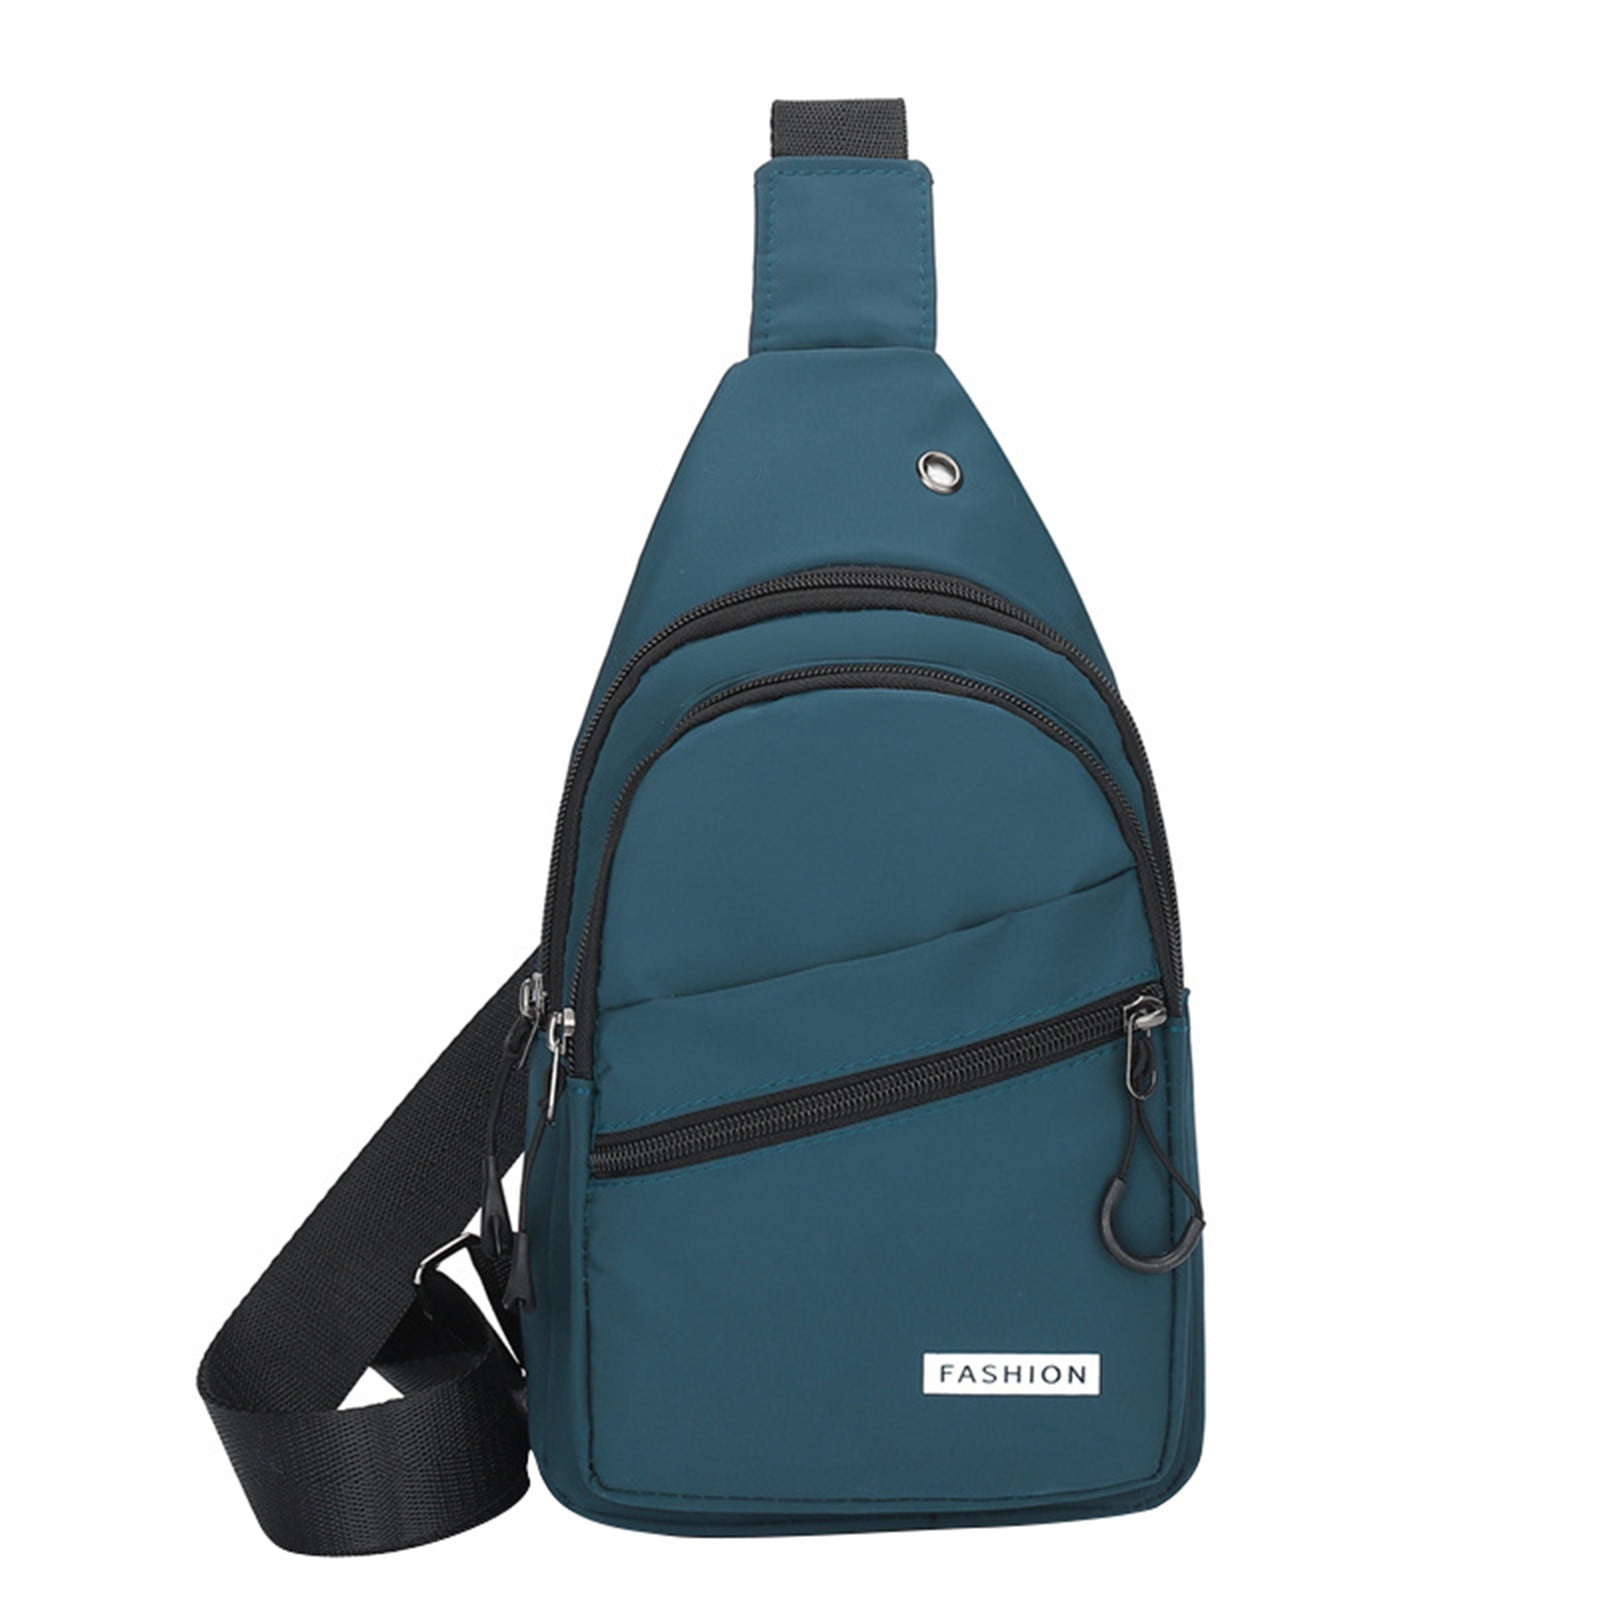 WILDCRAFT Pac N Go Travel Sling Bag 2 SAILRPUS81W (Size - Free, Blue) in  Jaipur at best price by Wildcraft - Justdial